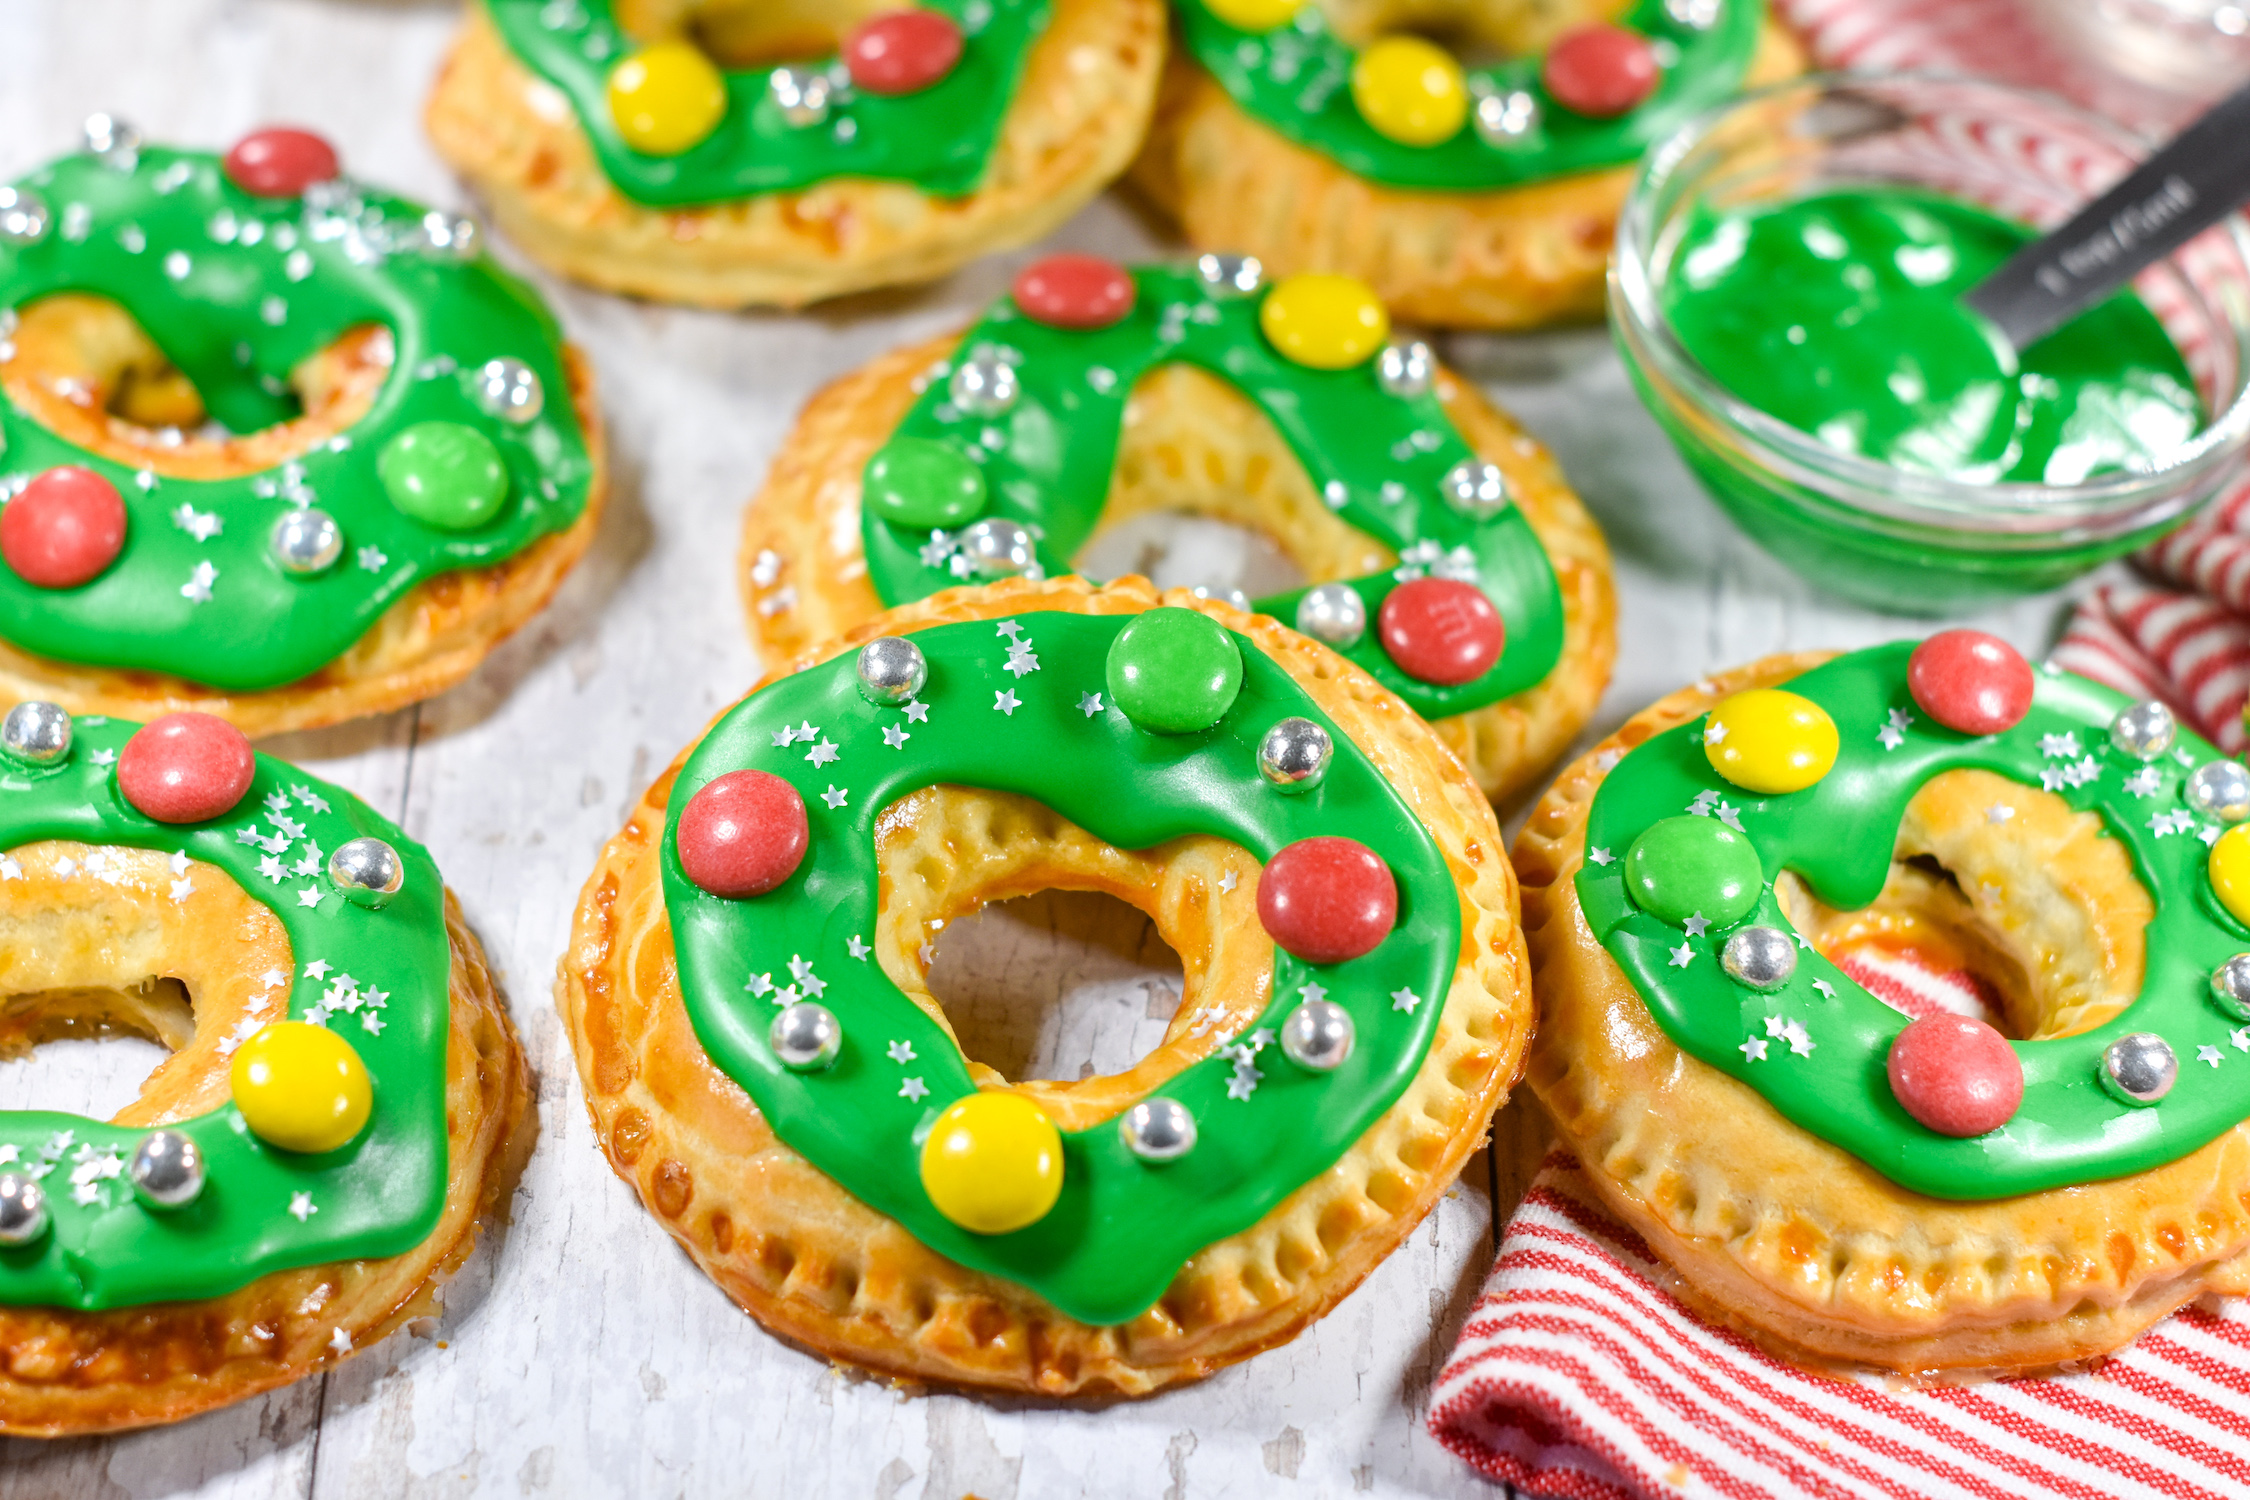 Pastry wreaths with green icing and colorful decorations, with a red and white tea towel